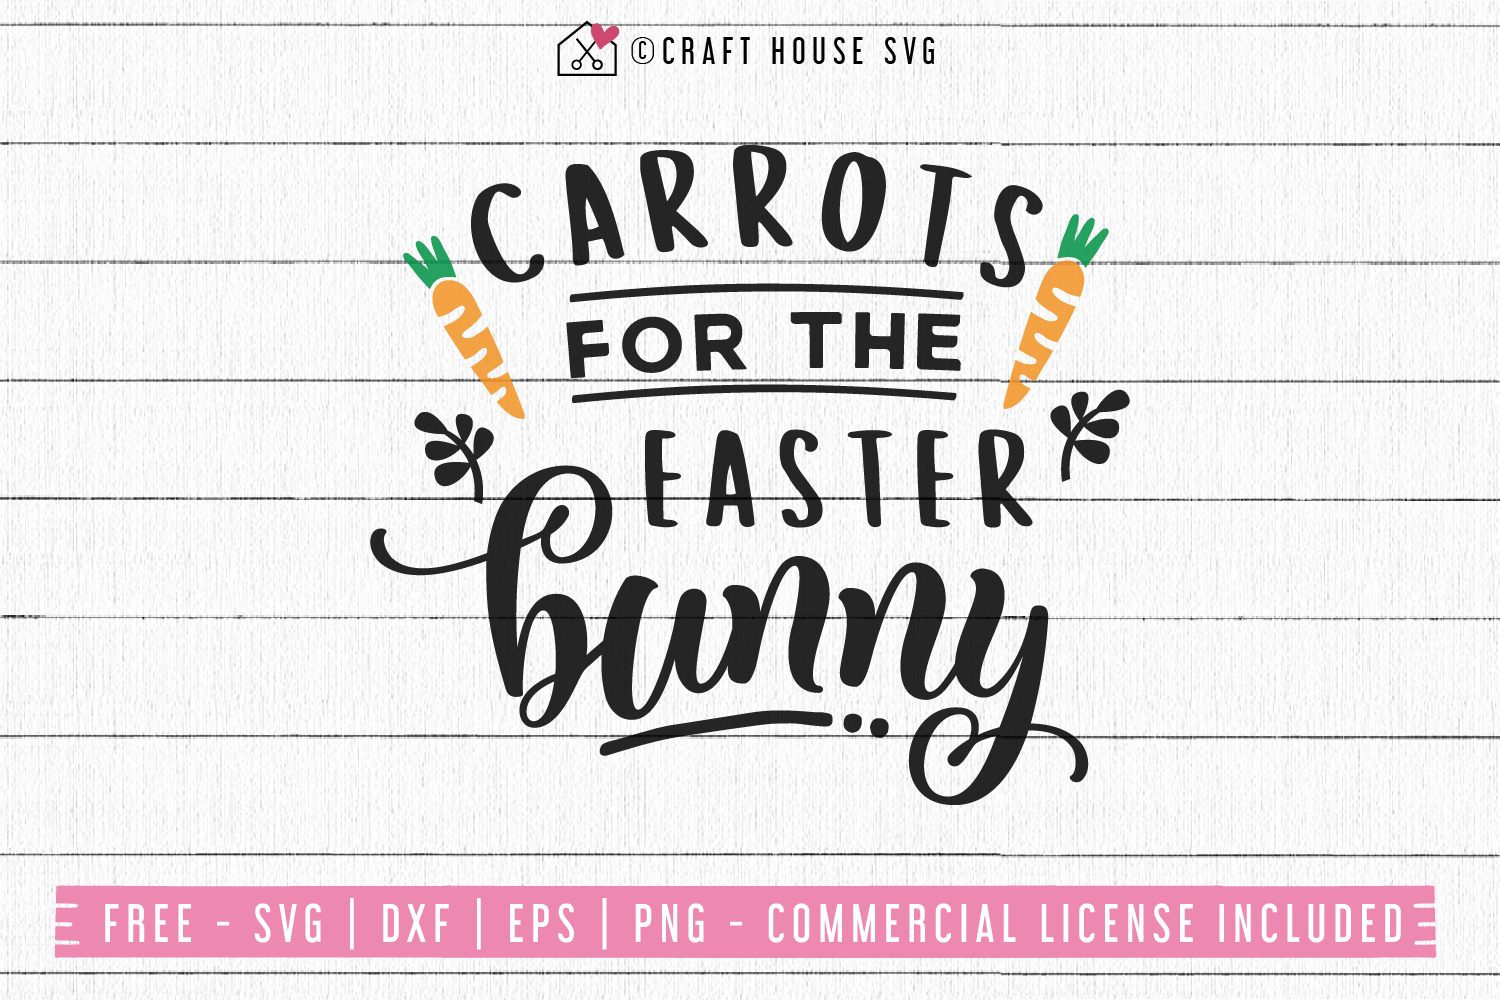 Free Carrots for the Easter Bunny SVG | FB69 Craft House SVG - SVG files for Cricut and Silhouette